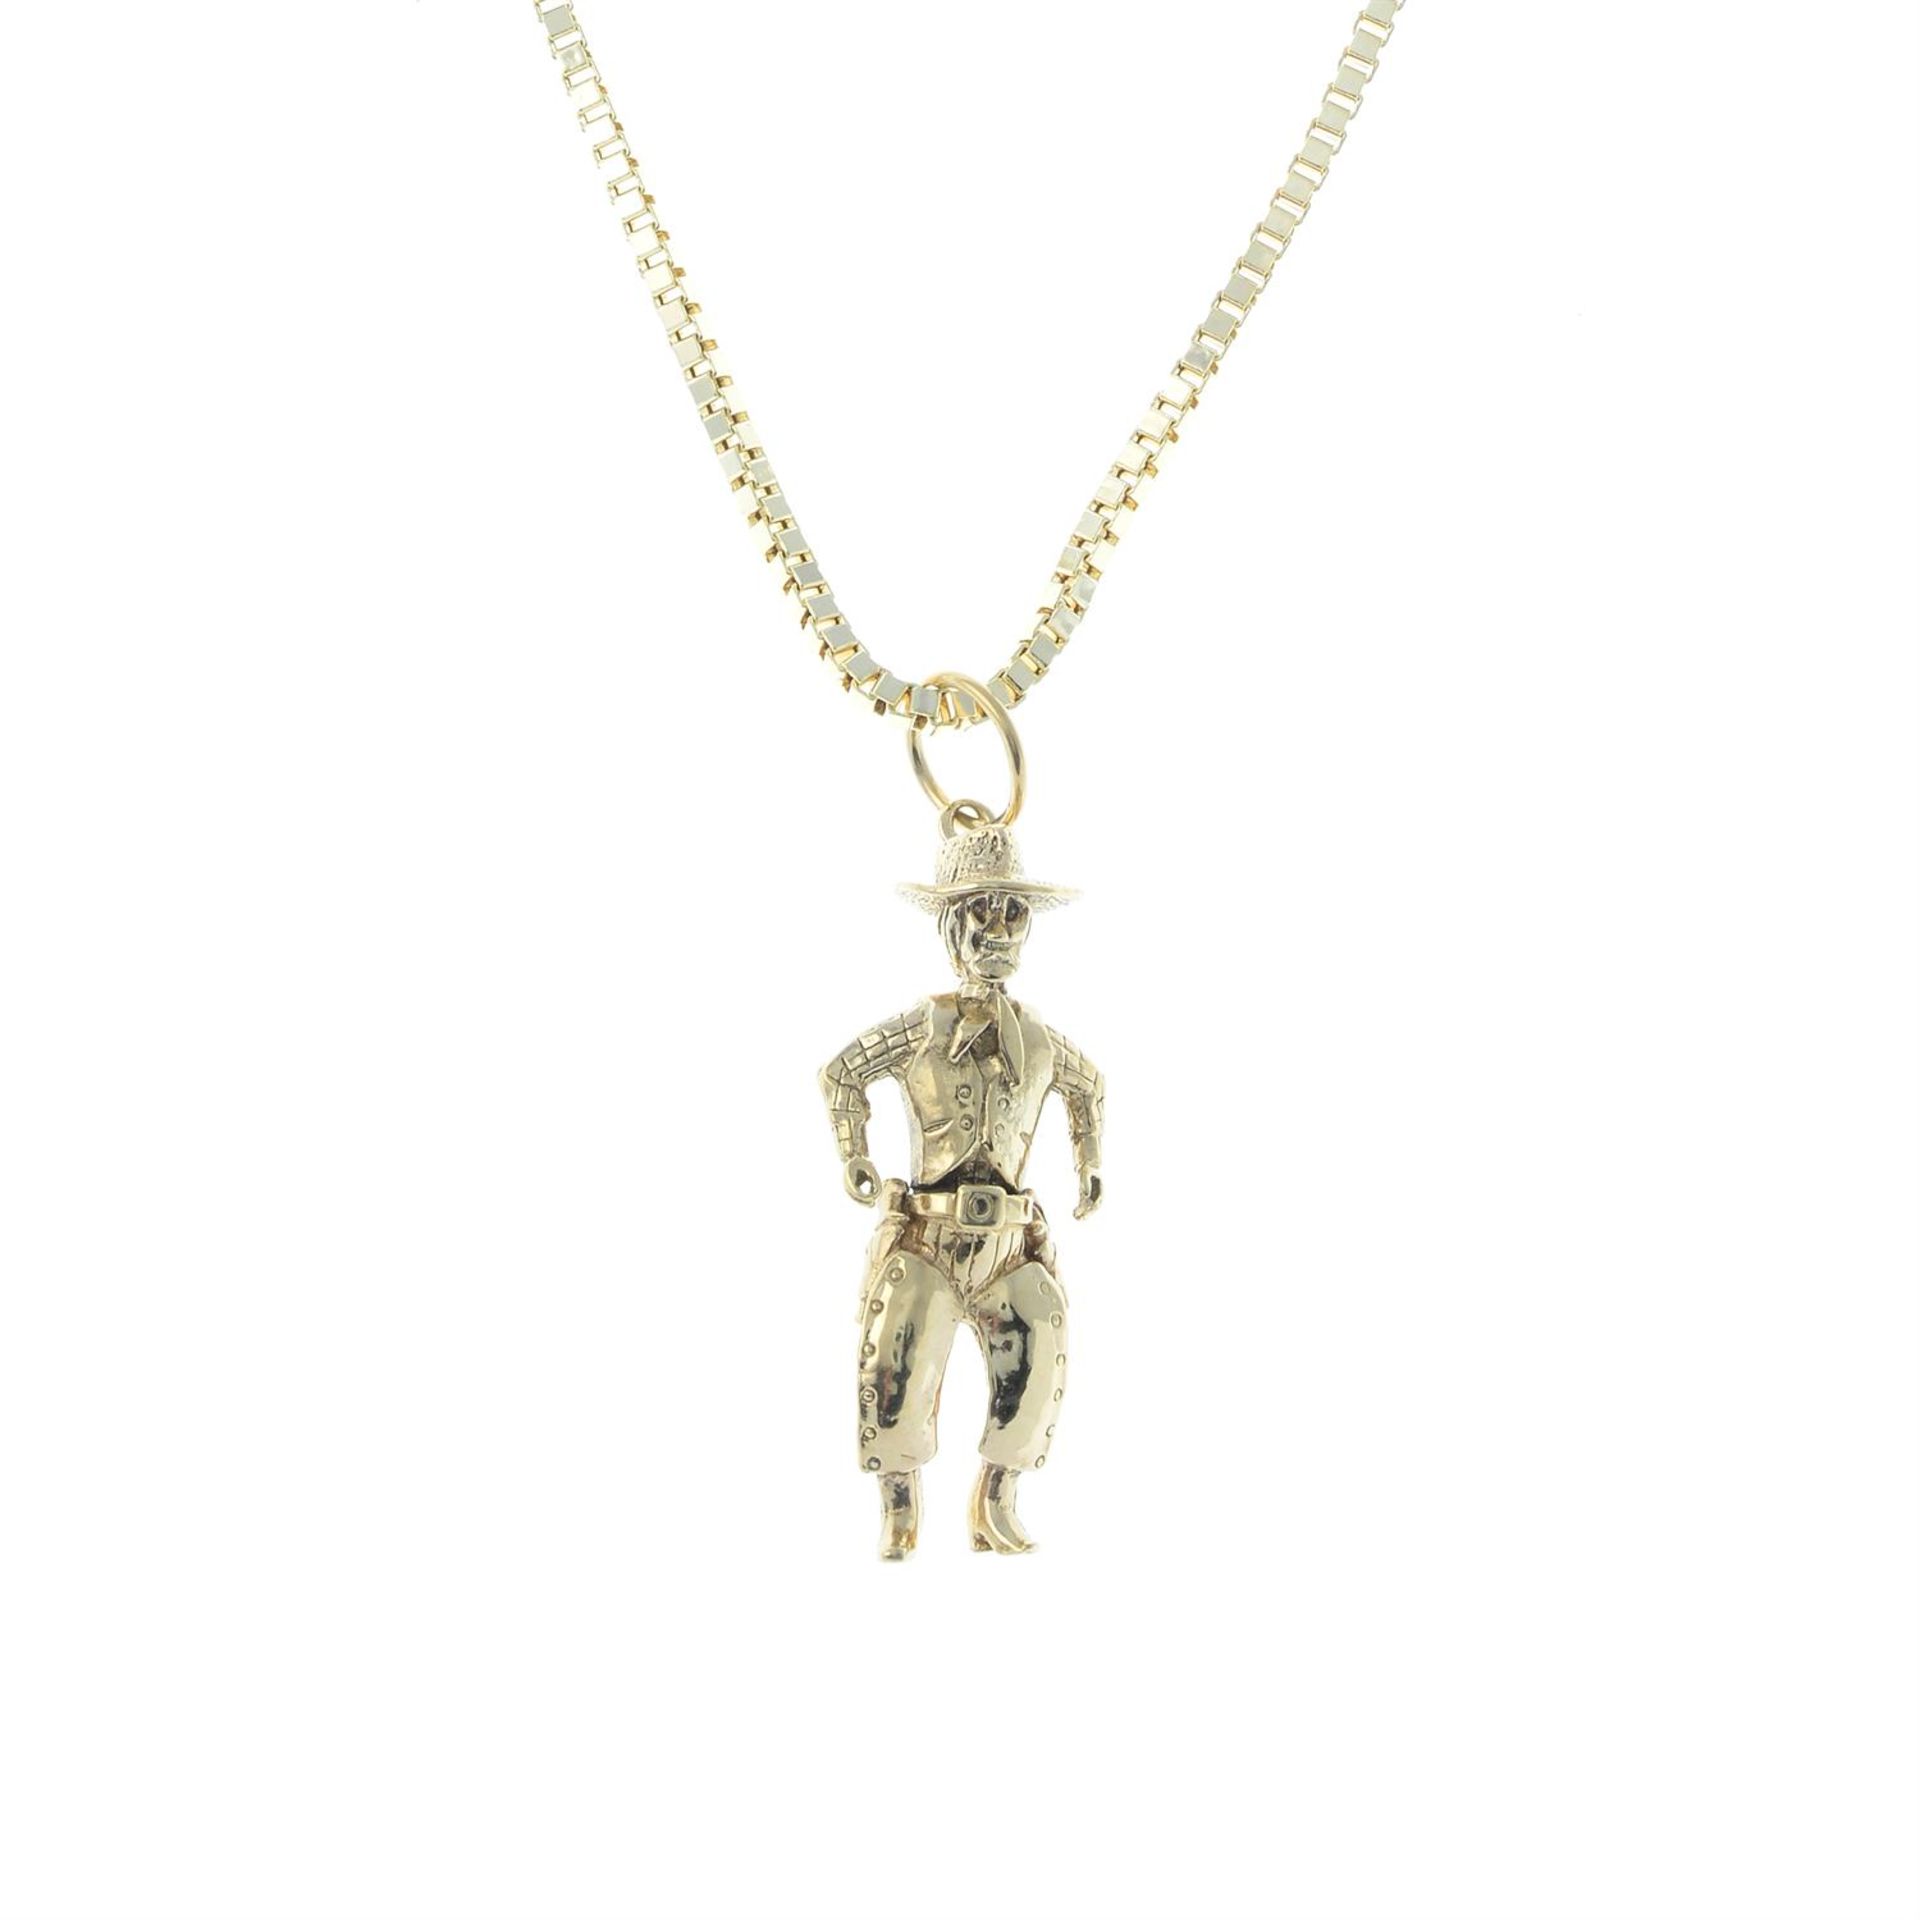 A 9ct gold cowboy pendant, with 9ct gold box-link chain.